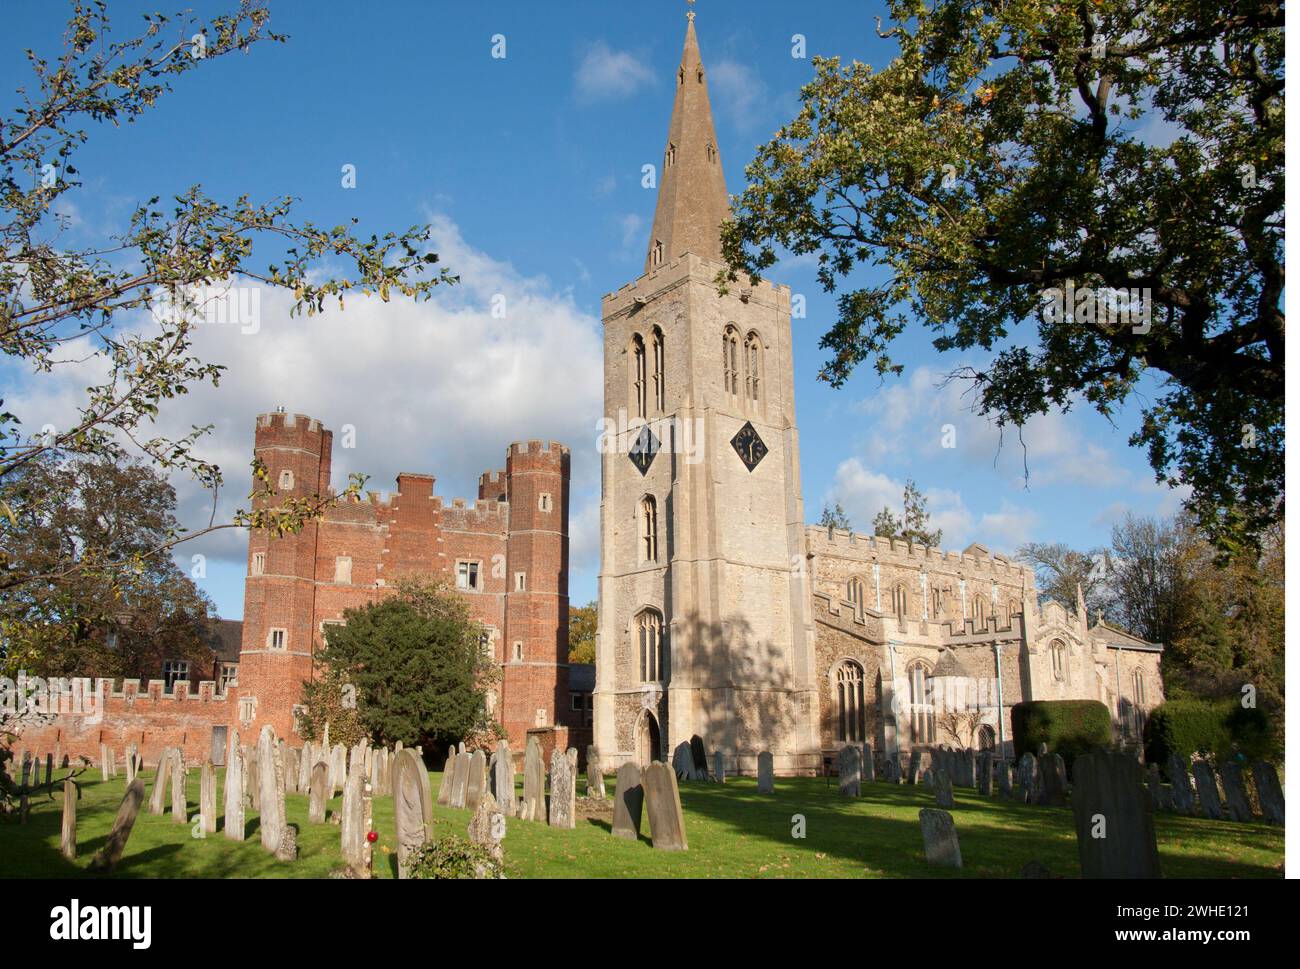 Buckden Towers, Bishops Palace & St Mary's church, Buckden, St Neots, Cambridgeshire, England Stock Photo